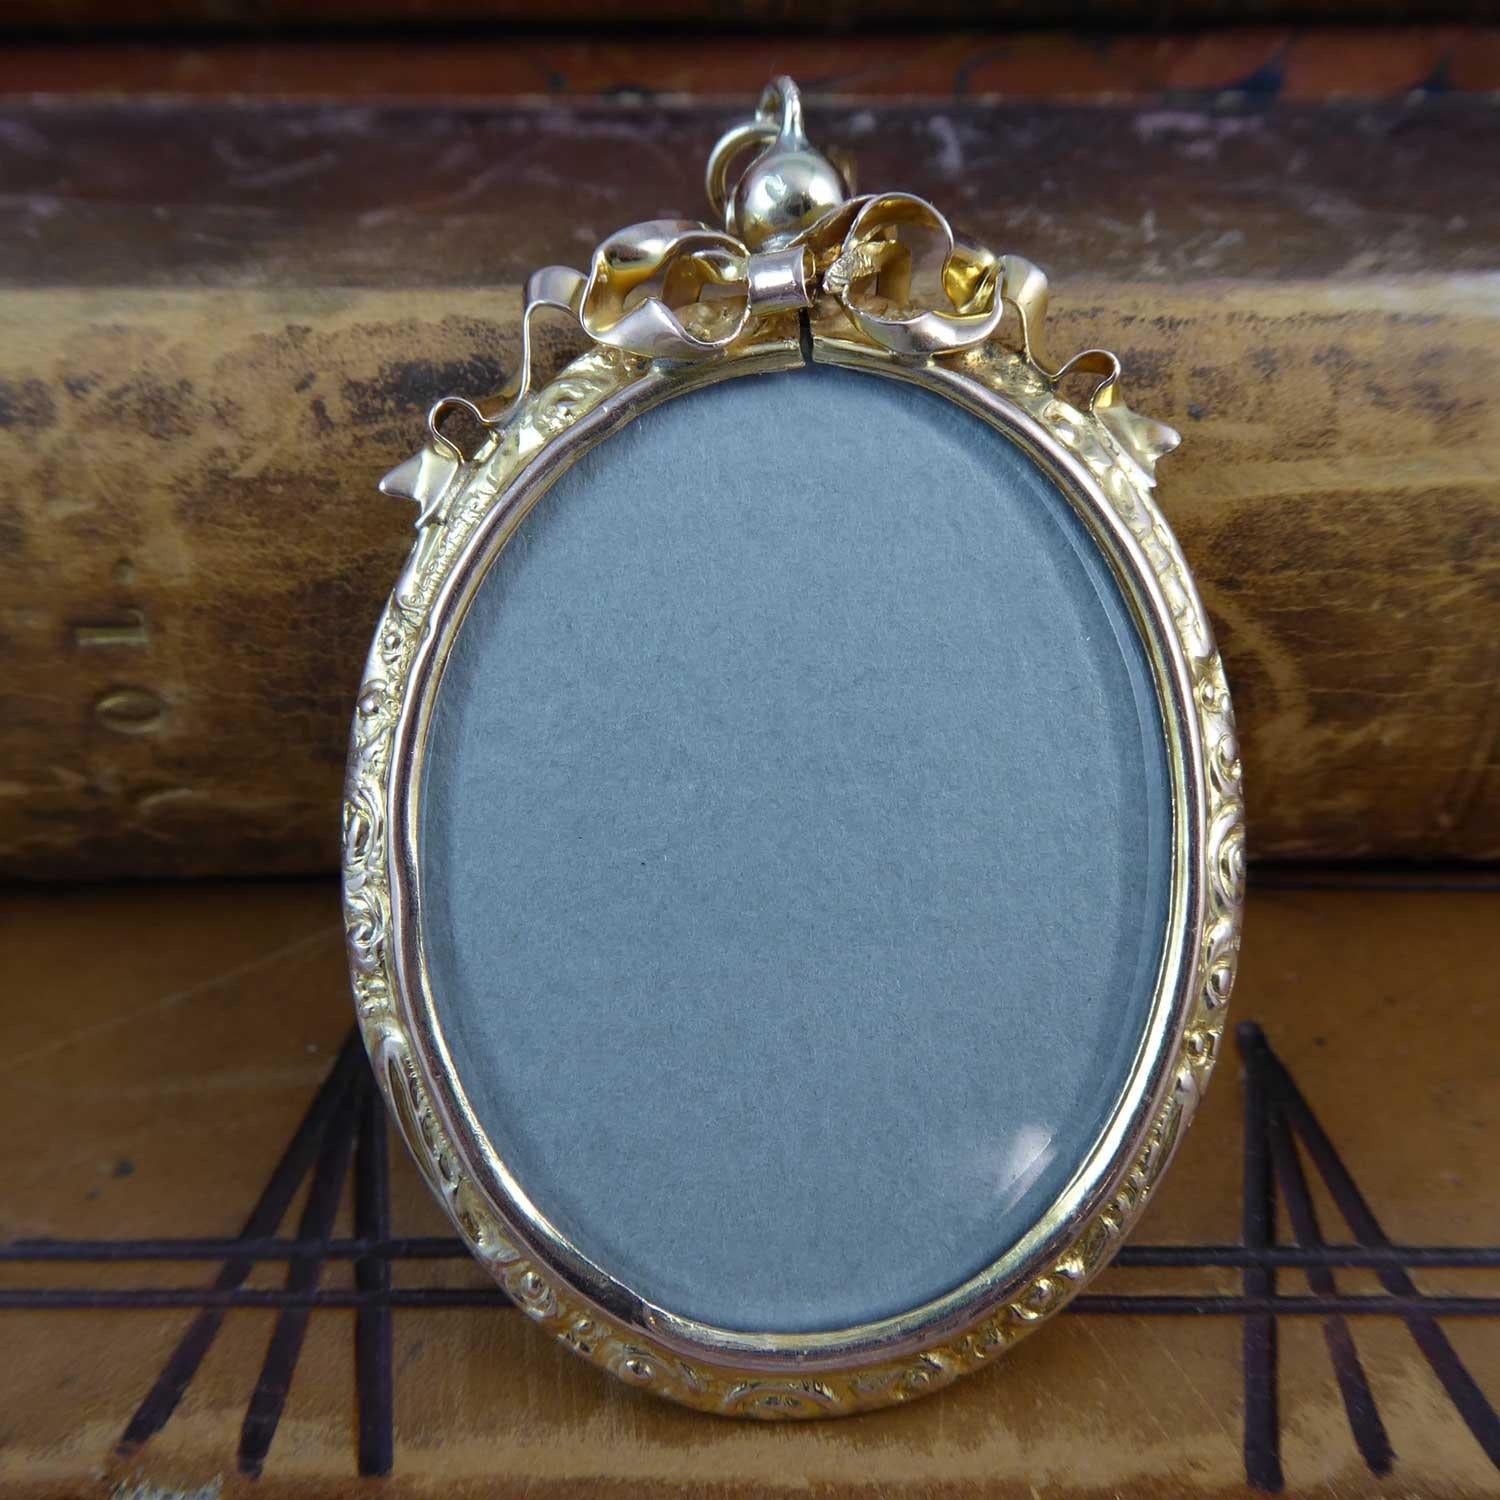 An antique picture locket dating from the Victorian era.  The locket is an elongated oval shape with crystal to both sides.  The edge is a richly carved rococo style engraved pattern with a ribbon bracket style top attached to a bead screw top which